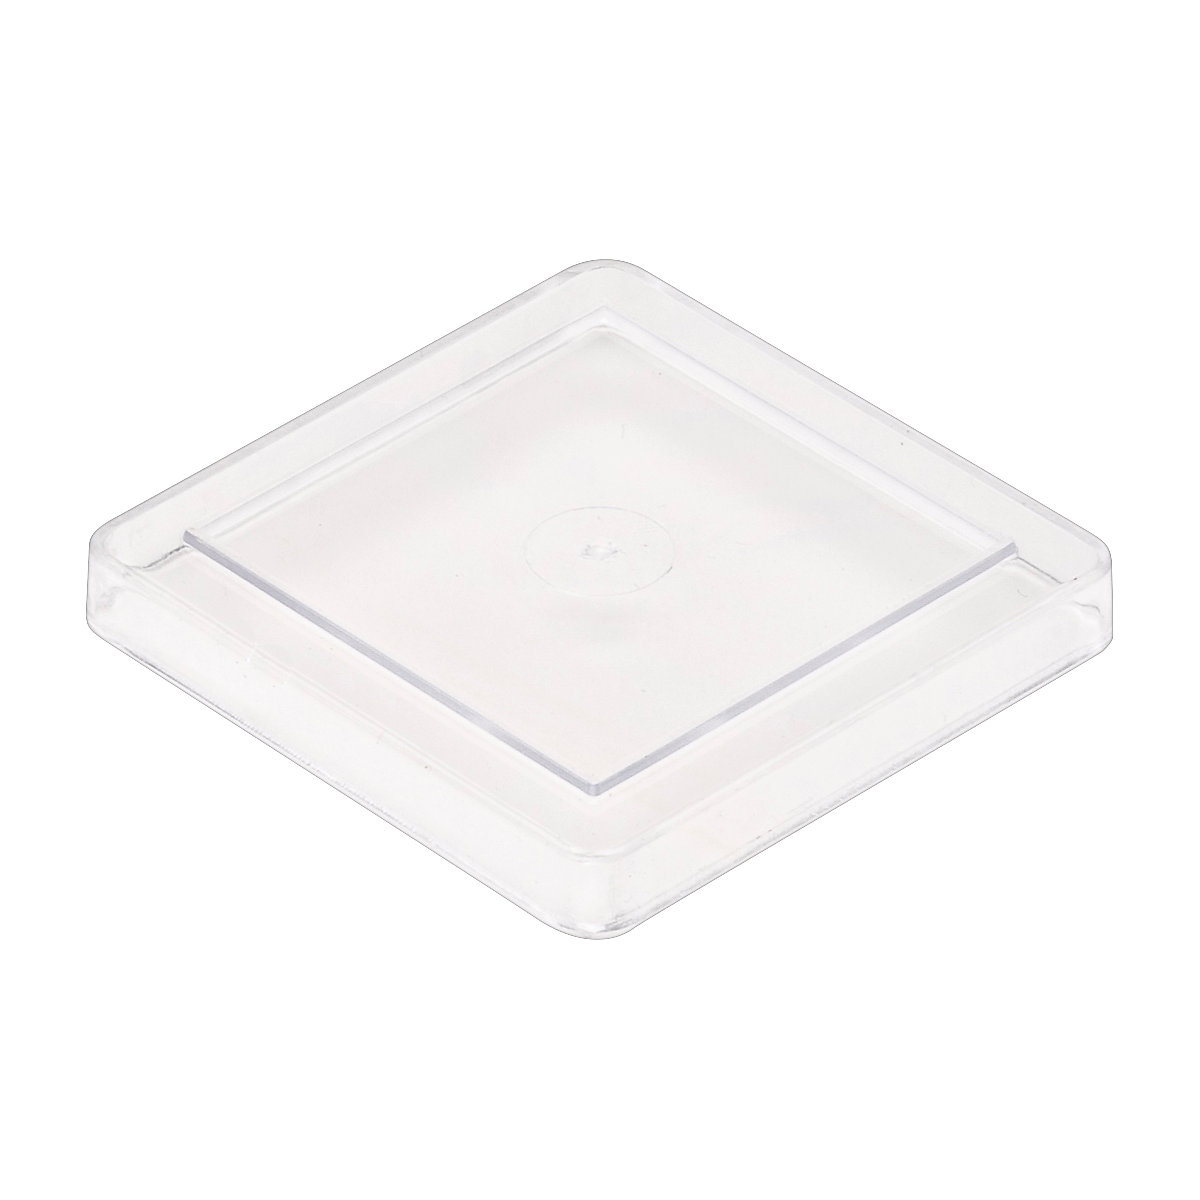 Lid for insert box, pack of 50, for box dims. LxW 49 x 49 mm-4